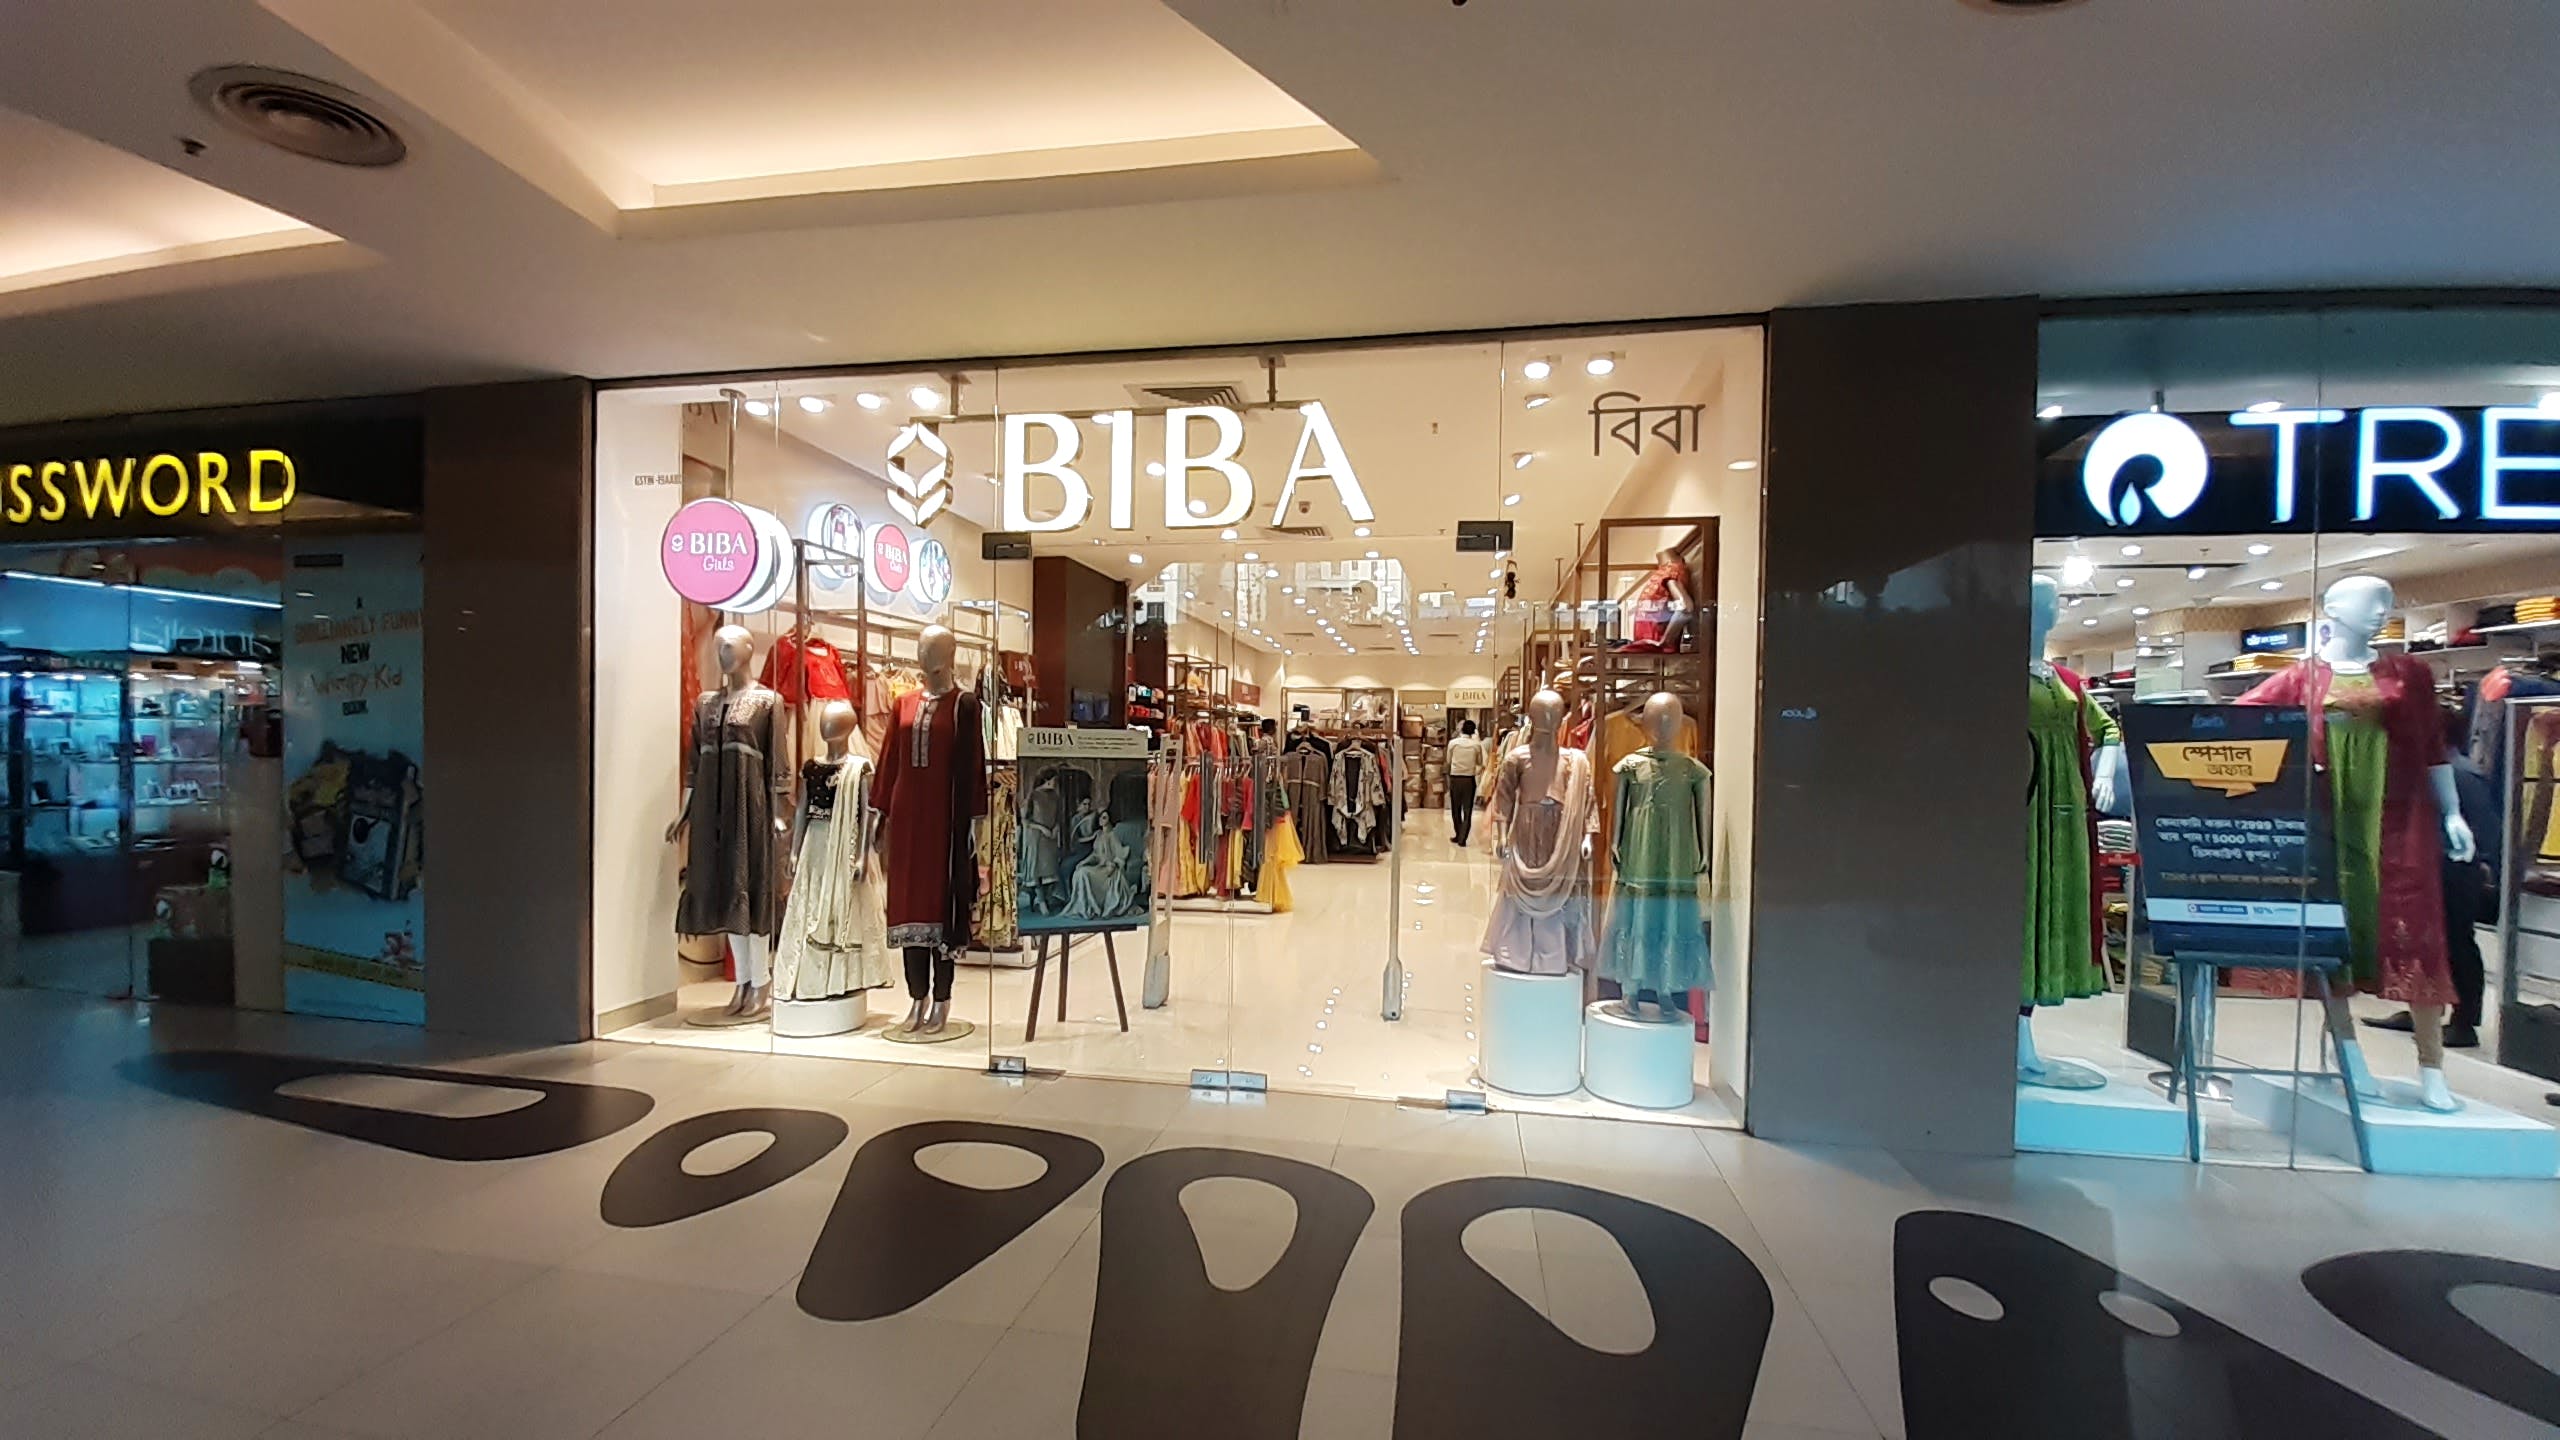 Outlet store,Shopping mall,Building,Boutique,Retail,Footwear,Display window,Shopping,Interior design,Fashion accessory